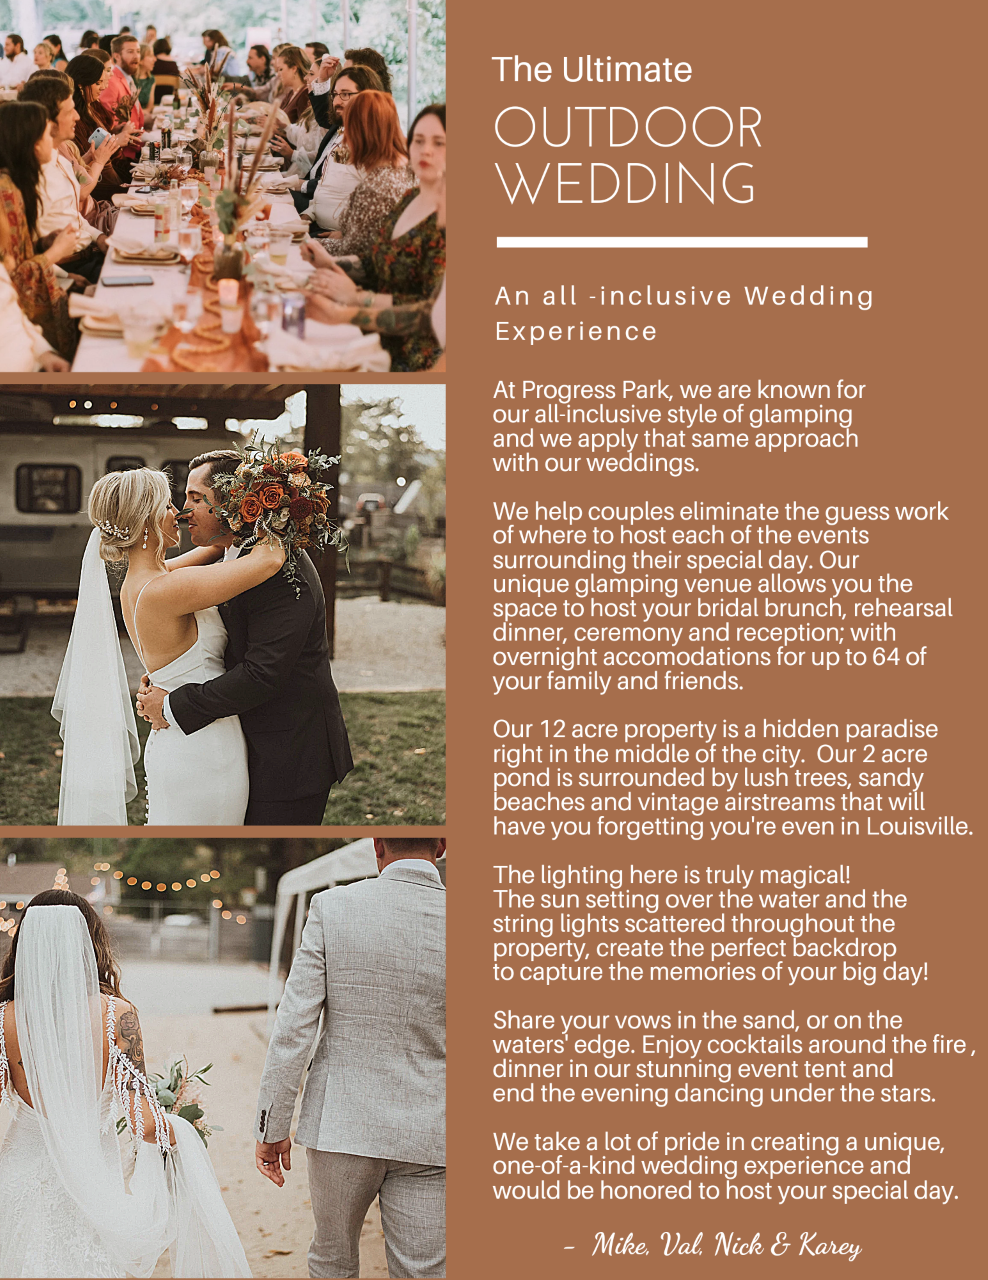 New Wedding Packages Available